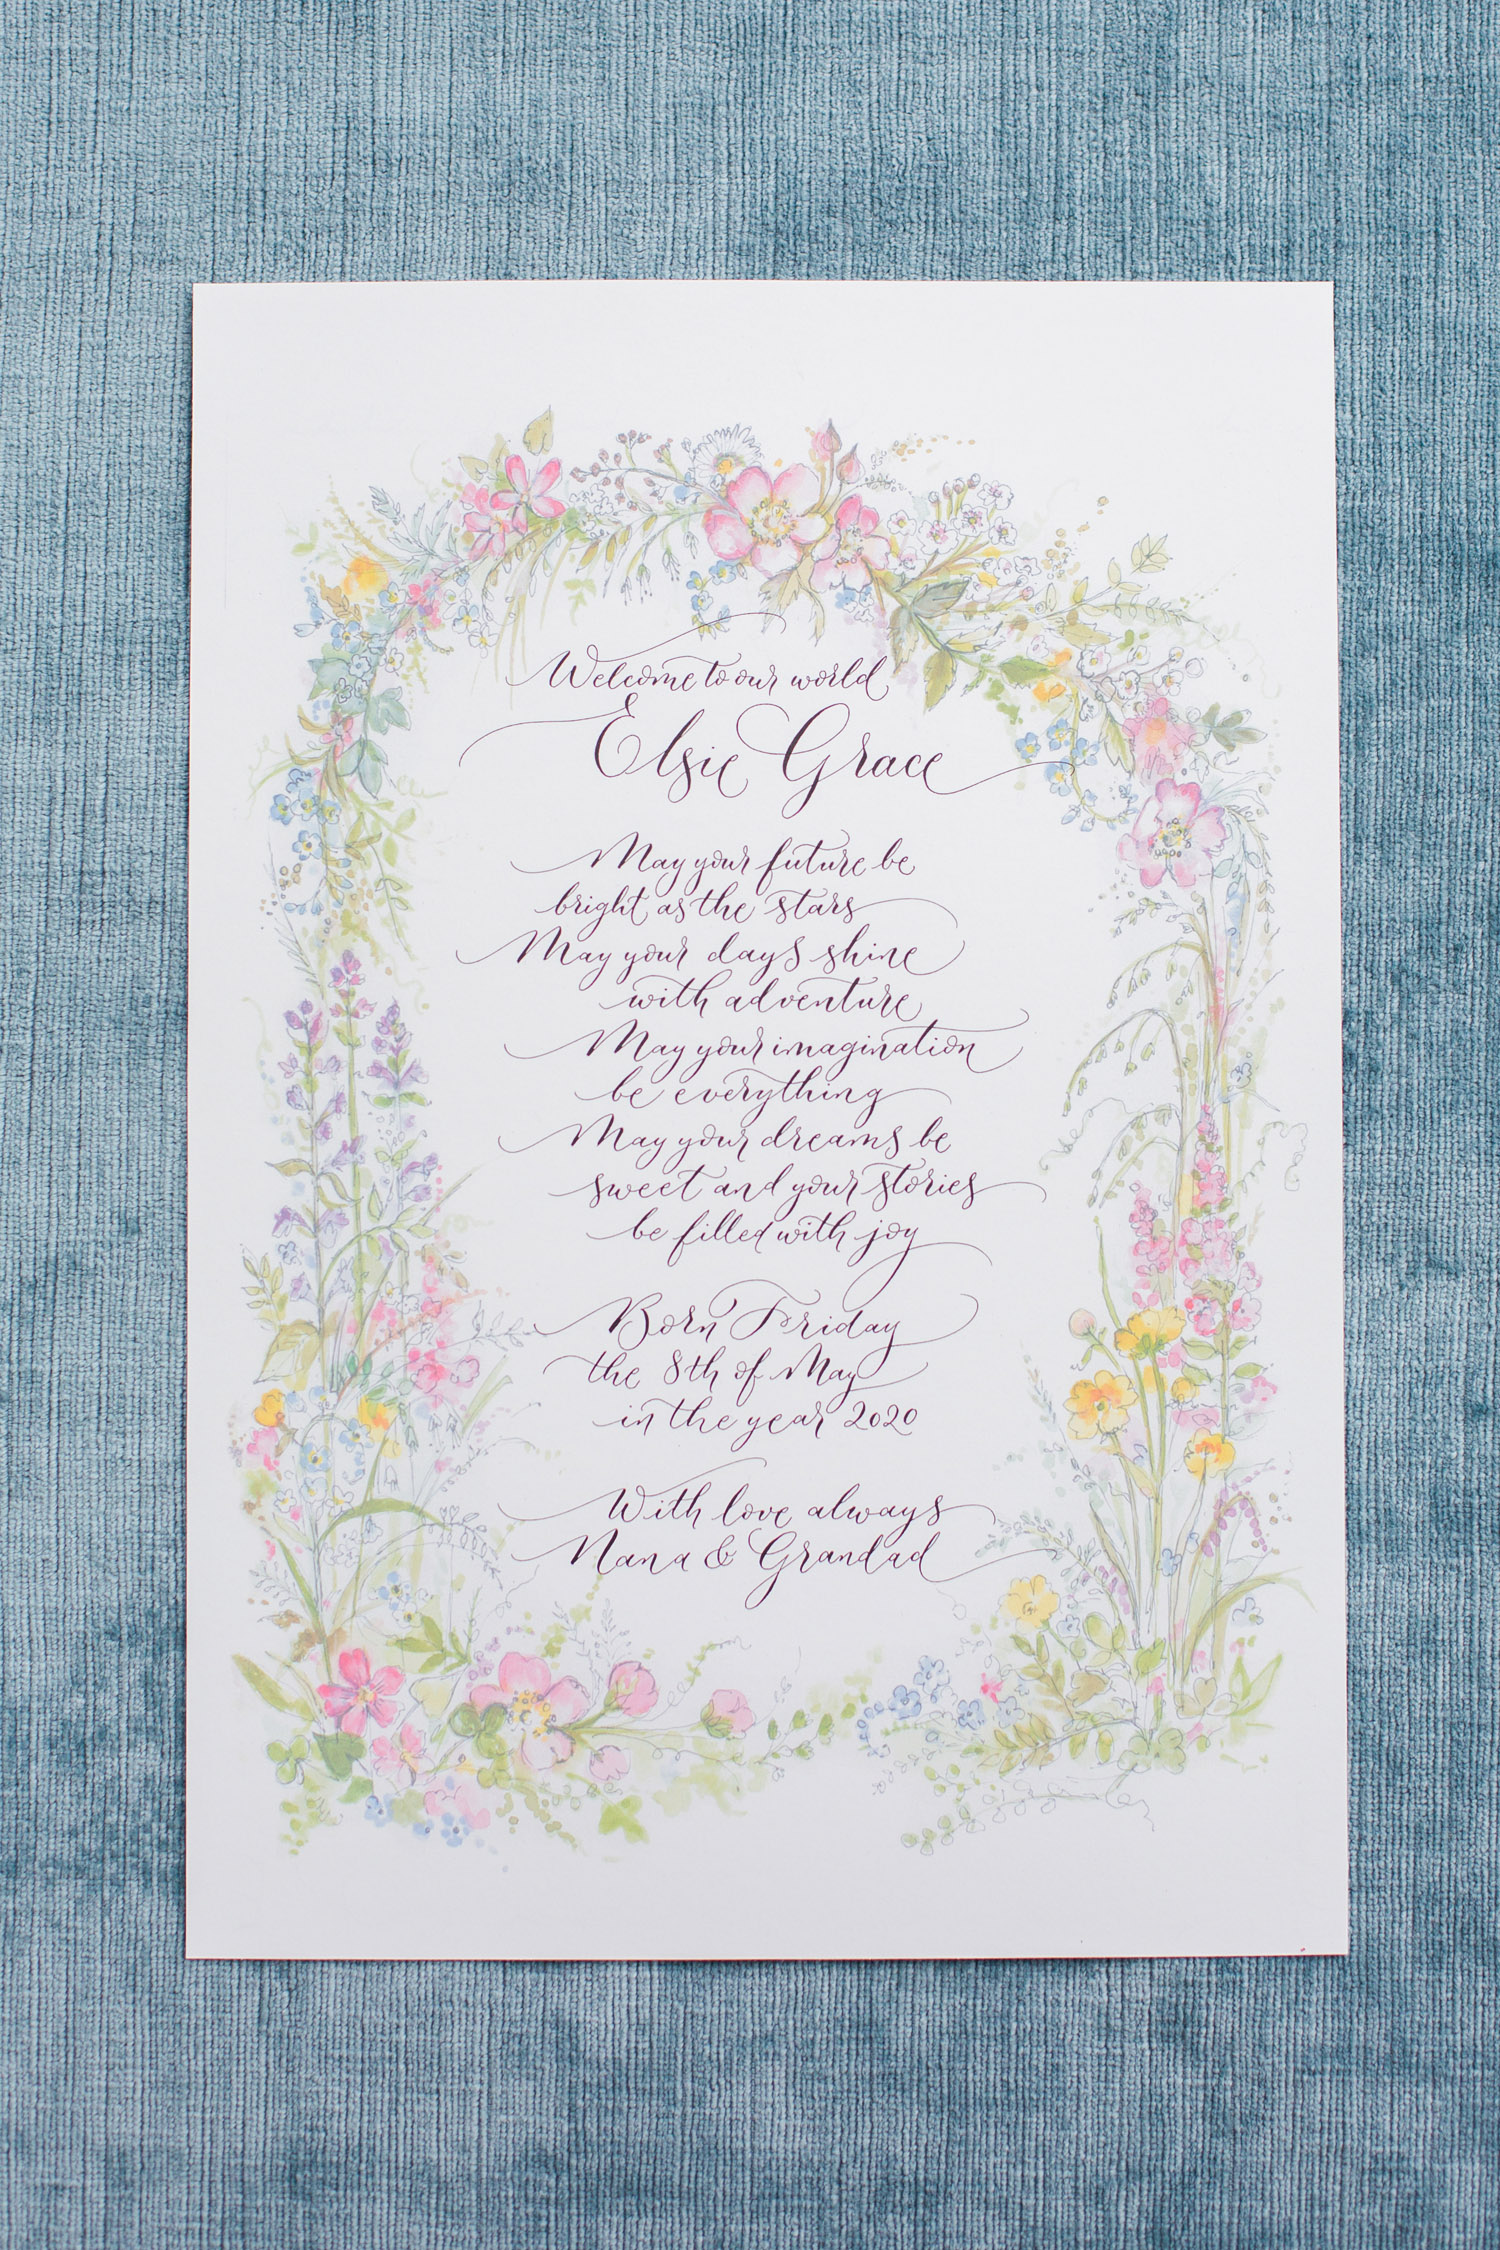 A calligraphy certificate welcoming a new baby, with floral illustrations by Amy Swann. 